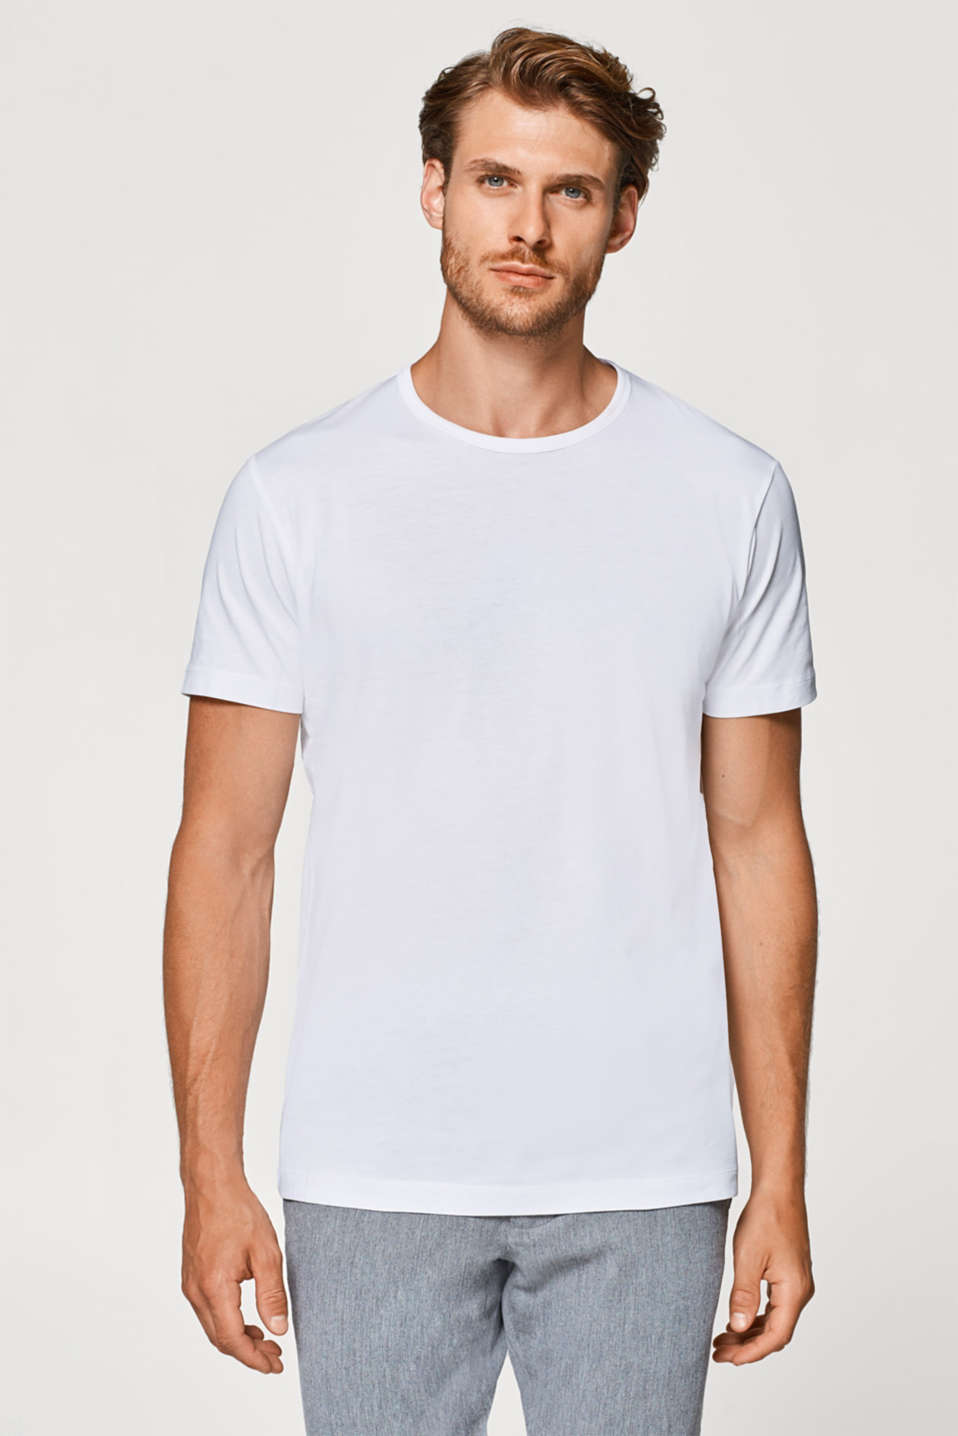 Esprit - Jersey T-shirt made of 100% pima cotton at our Online Shop